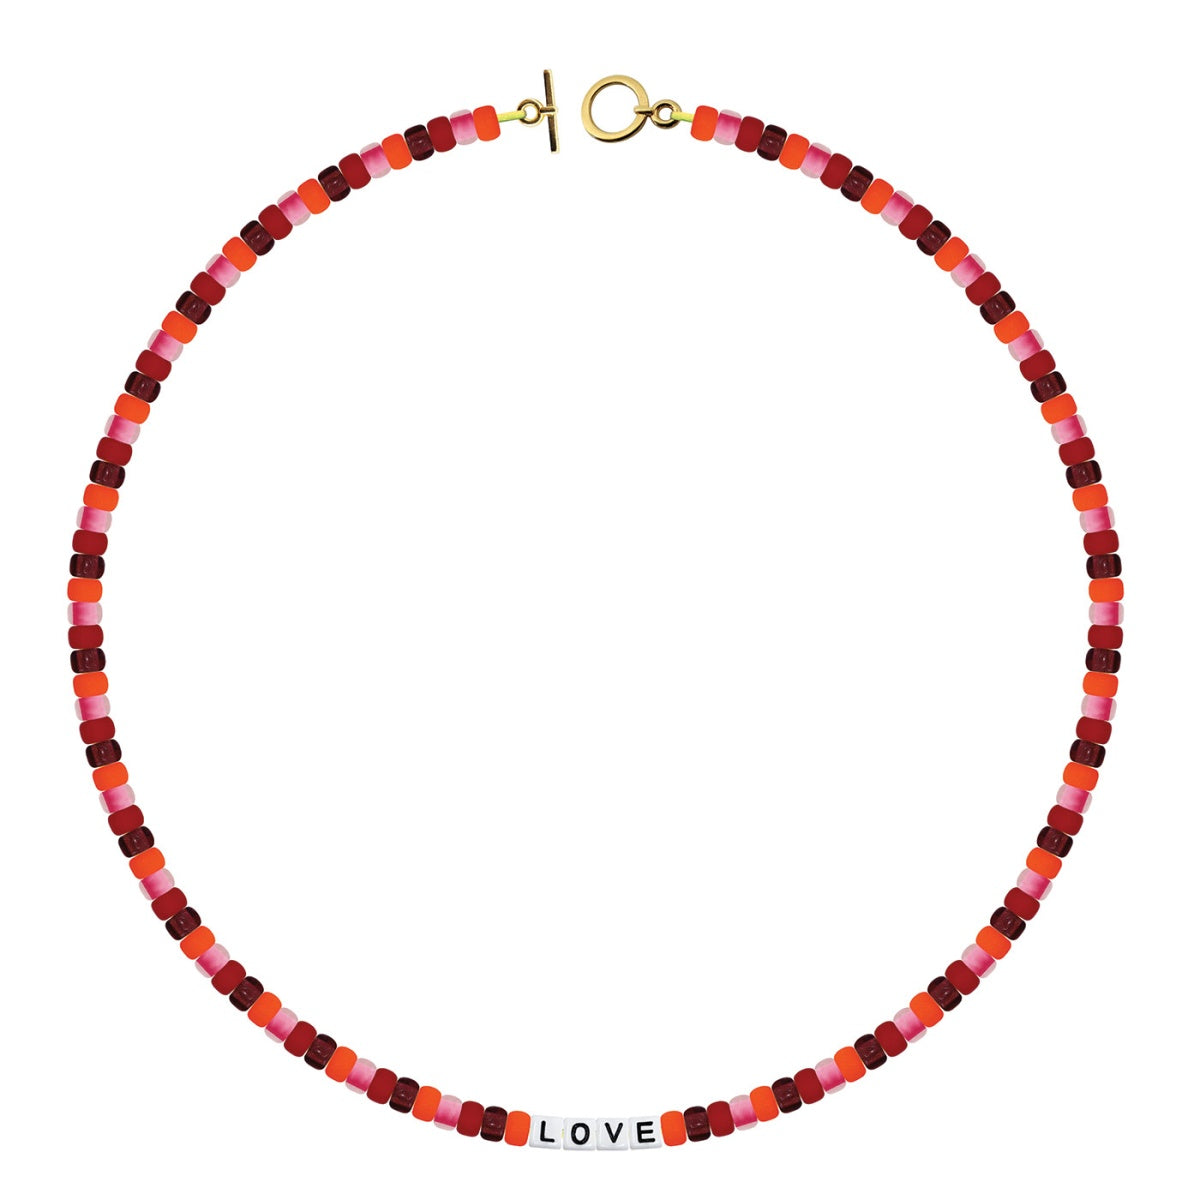 Pony Bead Necklace Orange Red - LOVE Square letters